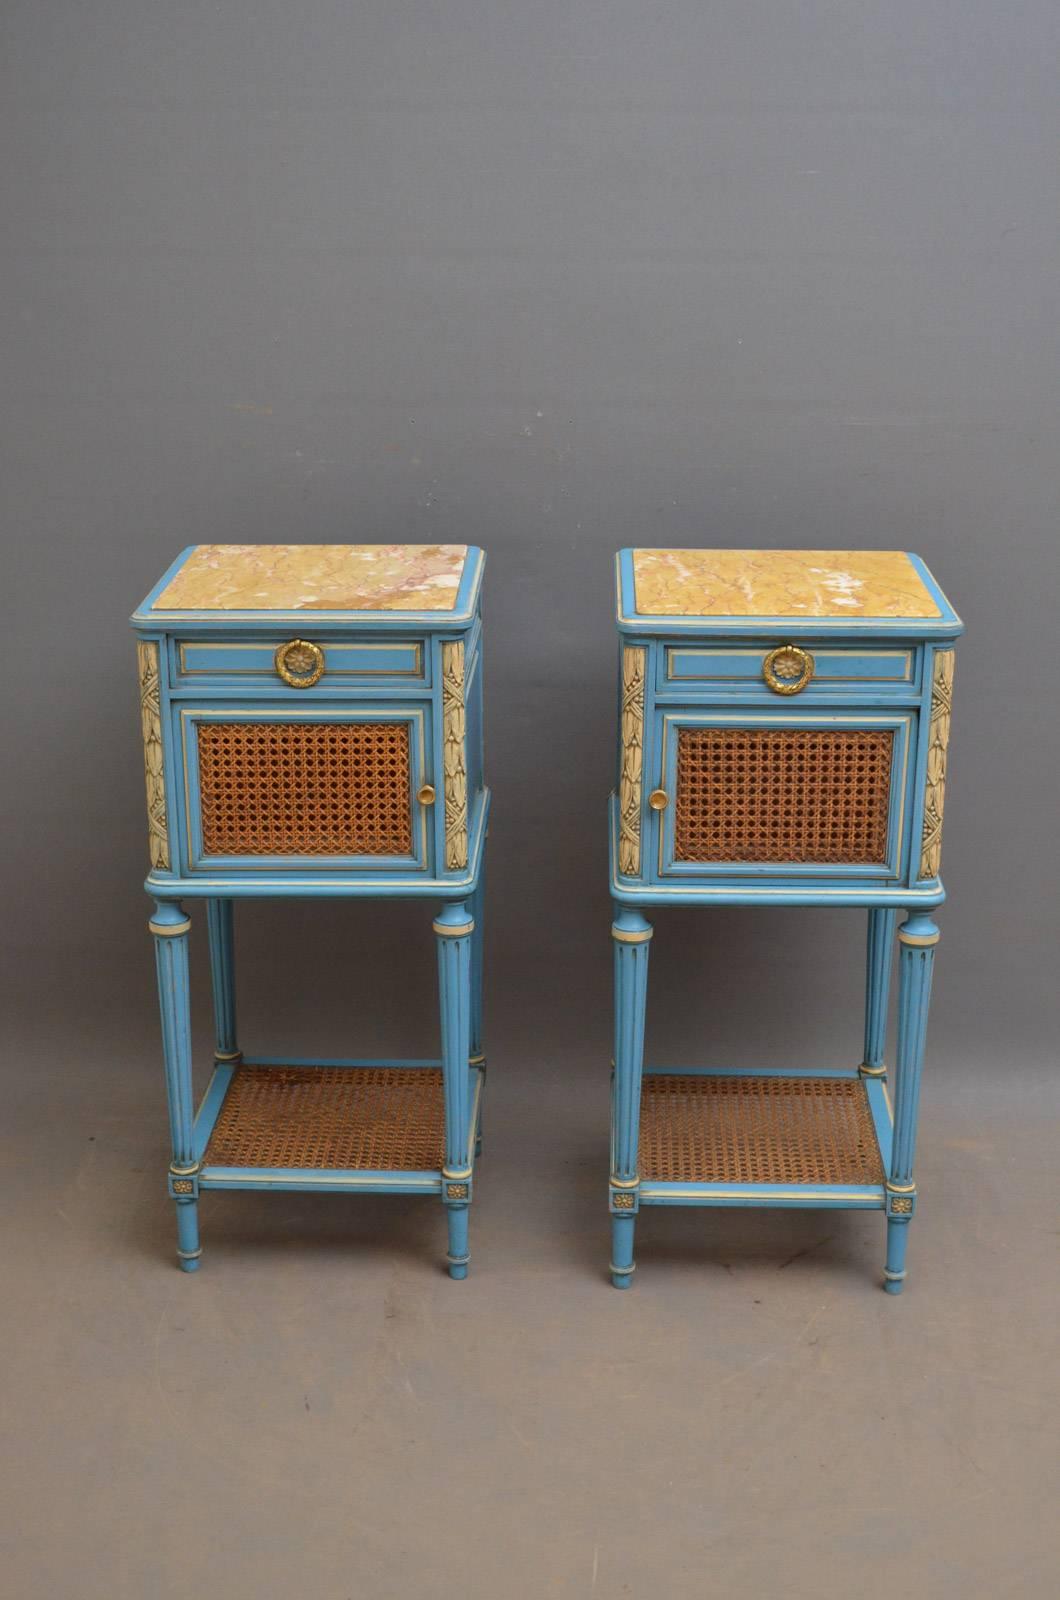 Sn4228 pair of 19th century painted bedside cabinets, each having original marble top above a drawer and a cupboard door with cane work to front, all fitted with original brass handles, standing on turned and reeded legs united by caned shelf. This